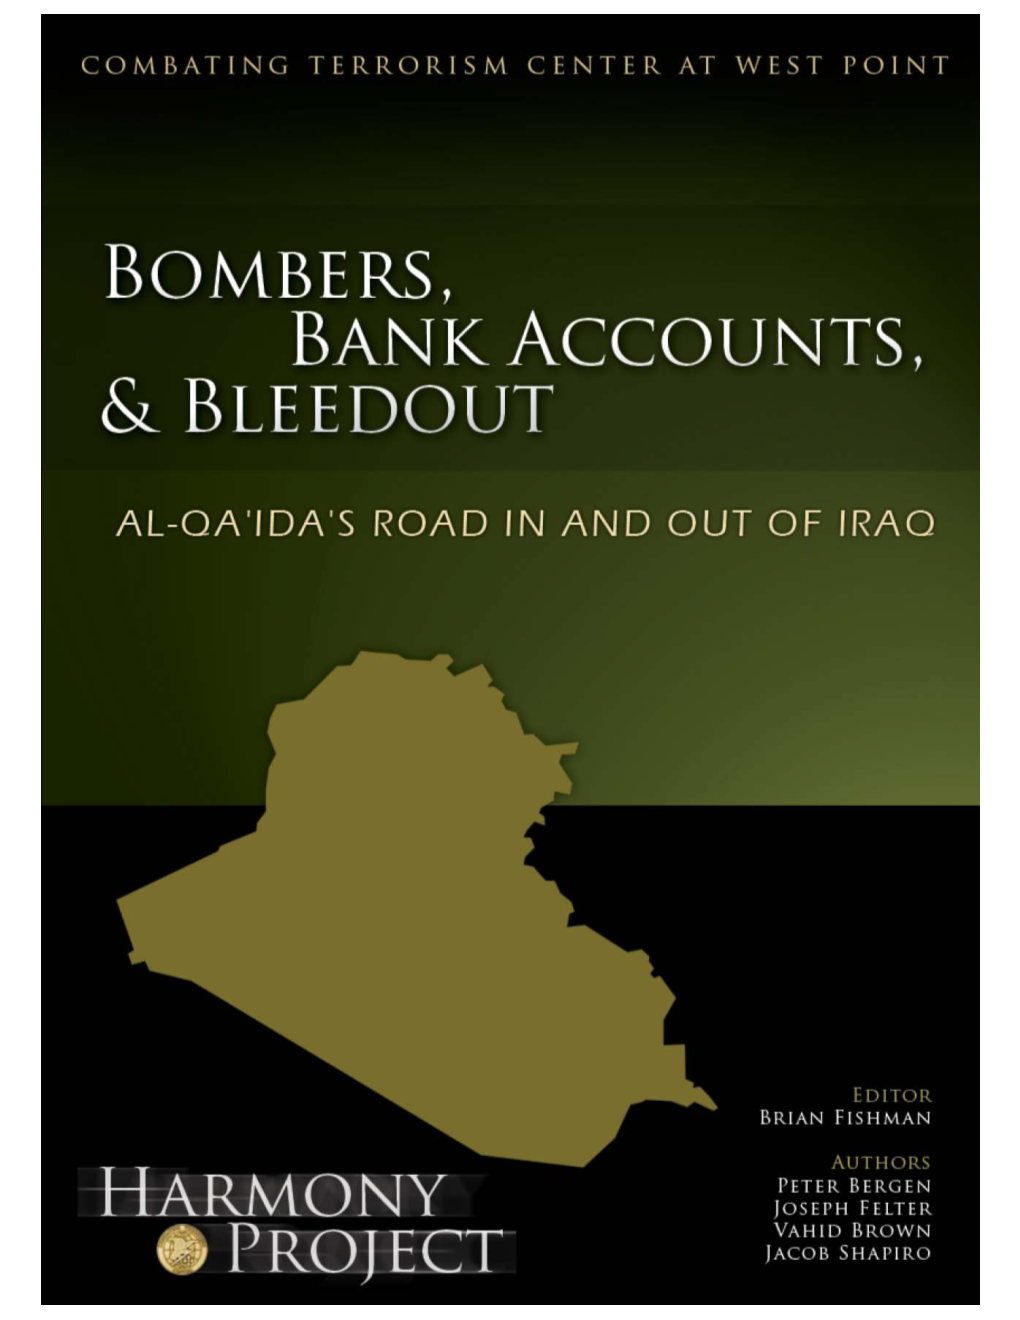 Al-Qa`Ida's Road in and out of Iraq